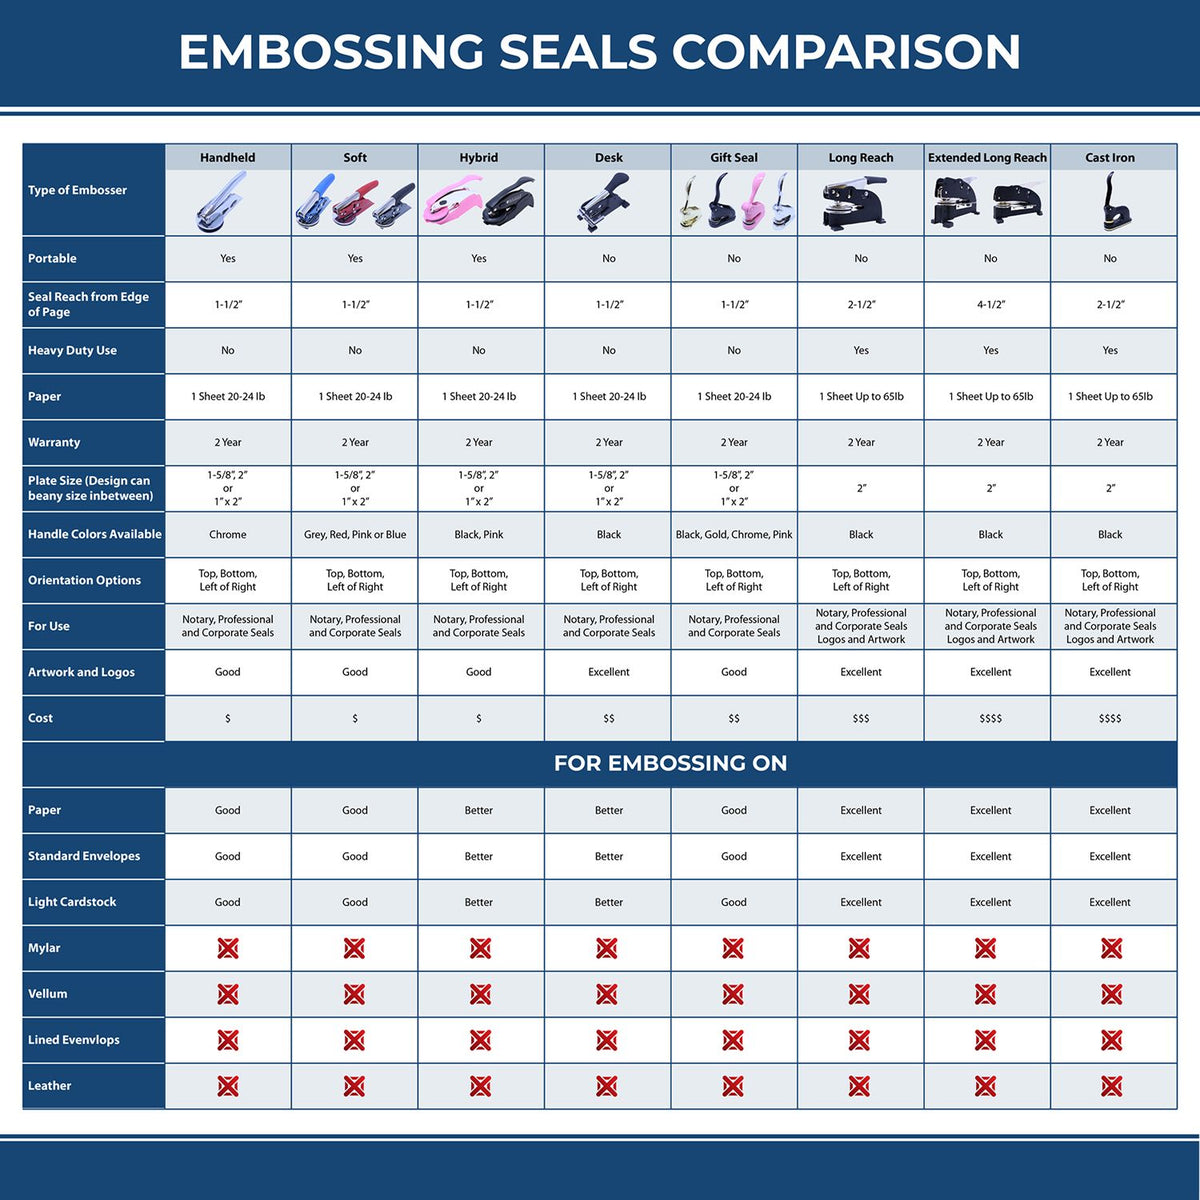 A comparison chart for the different types of mount models available for the State of South Carolina Extended Long Reach Geologist Seal